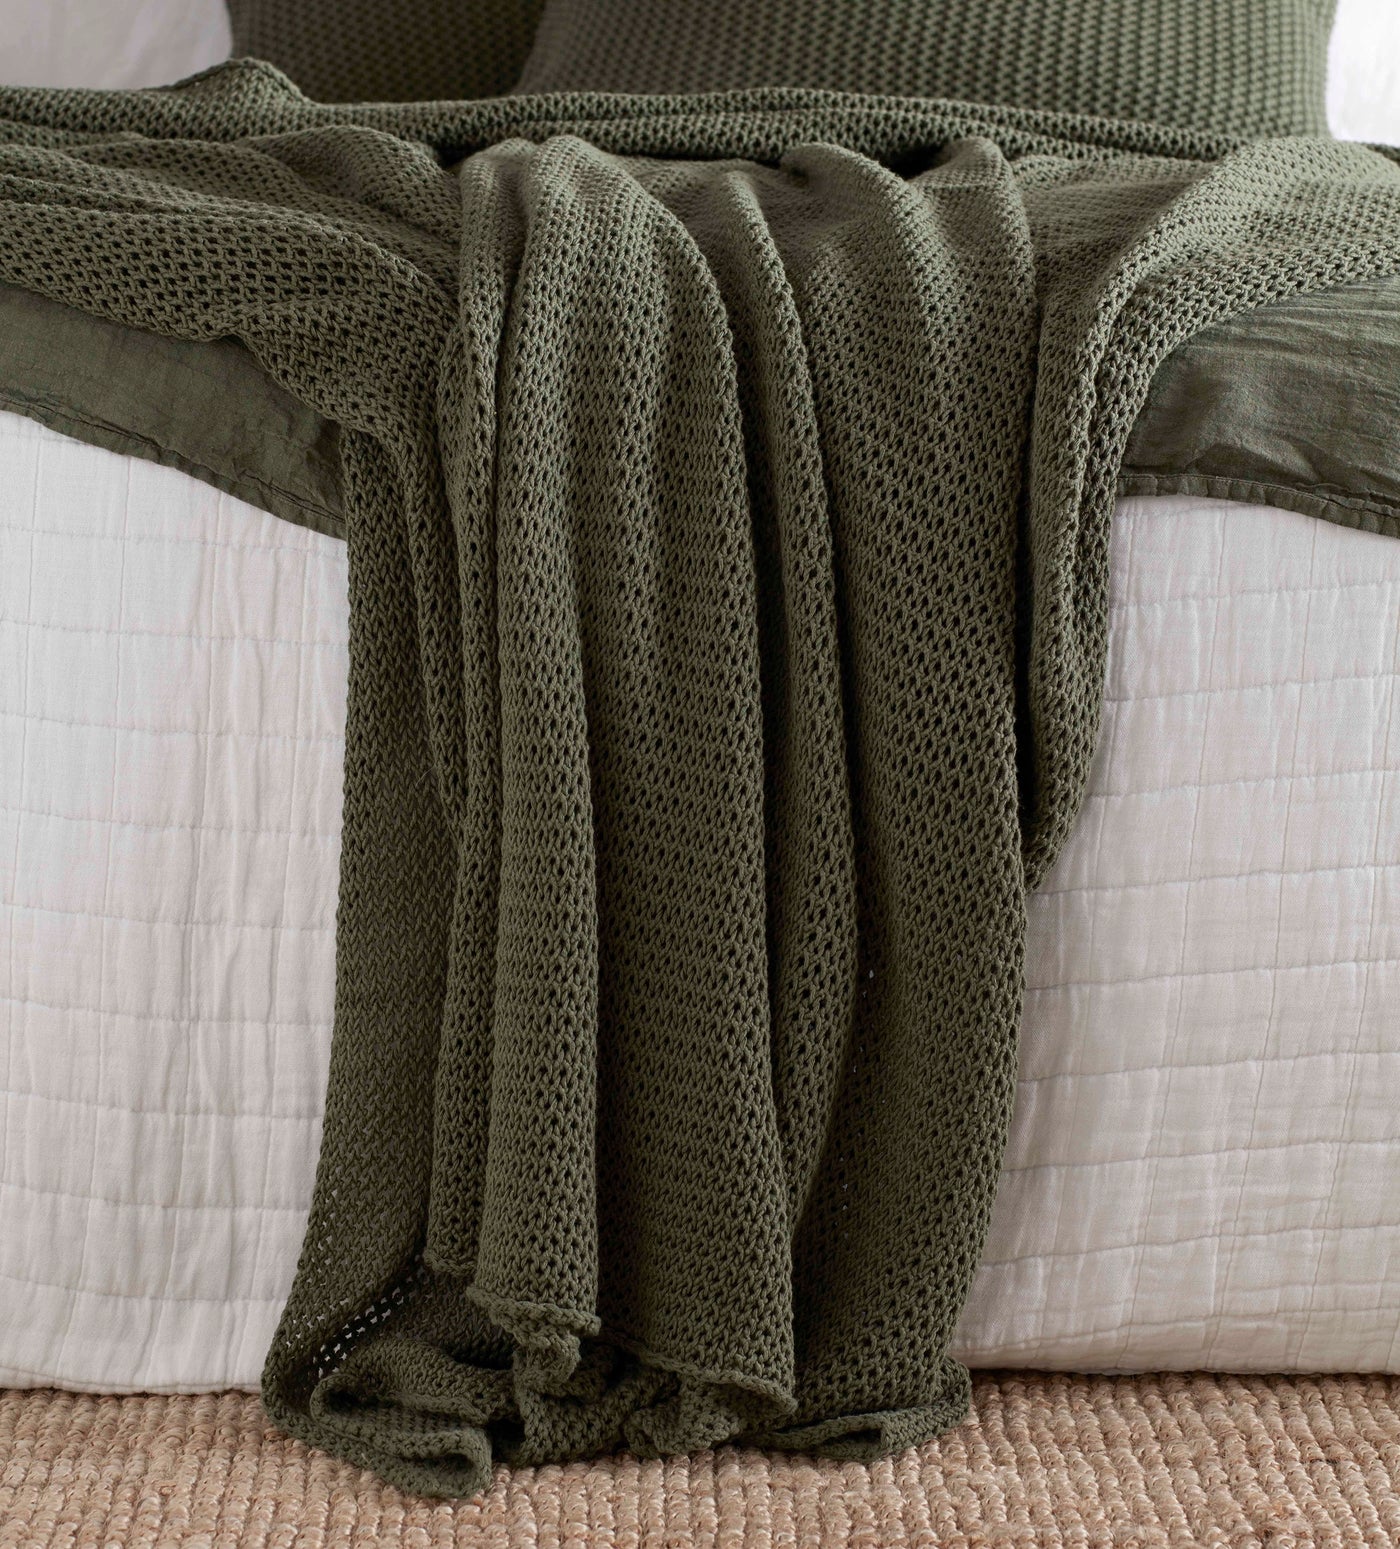 Olive Green Knitted Cushion Cover and Bed Throw